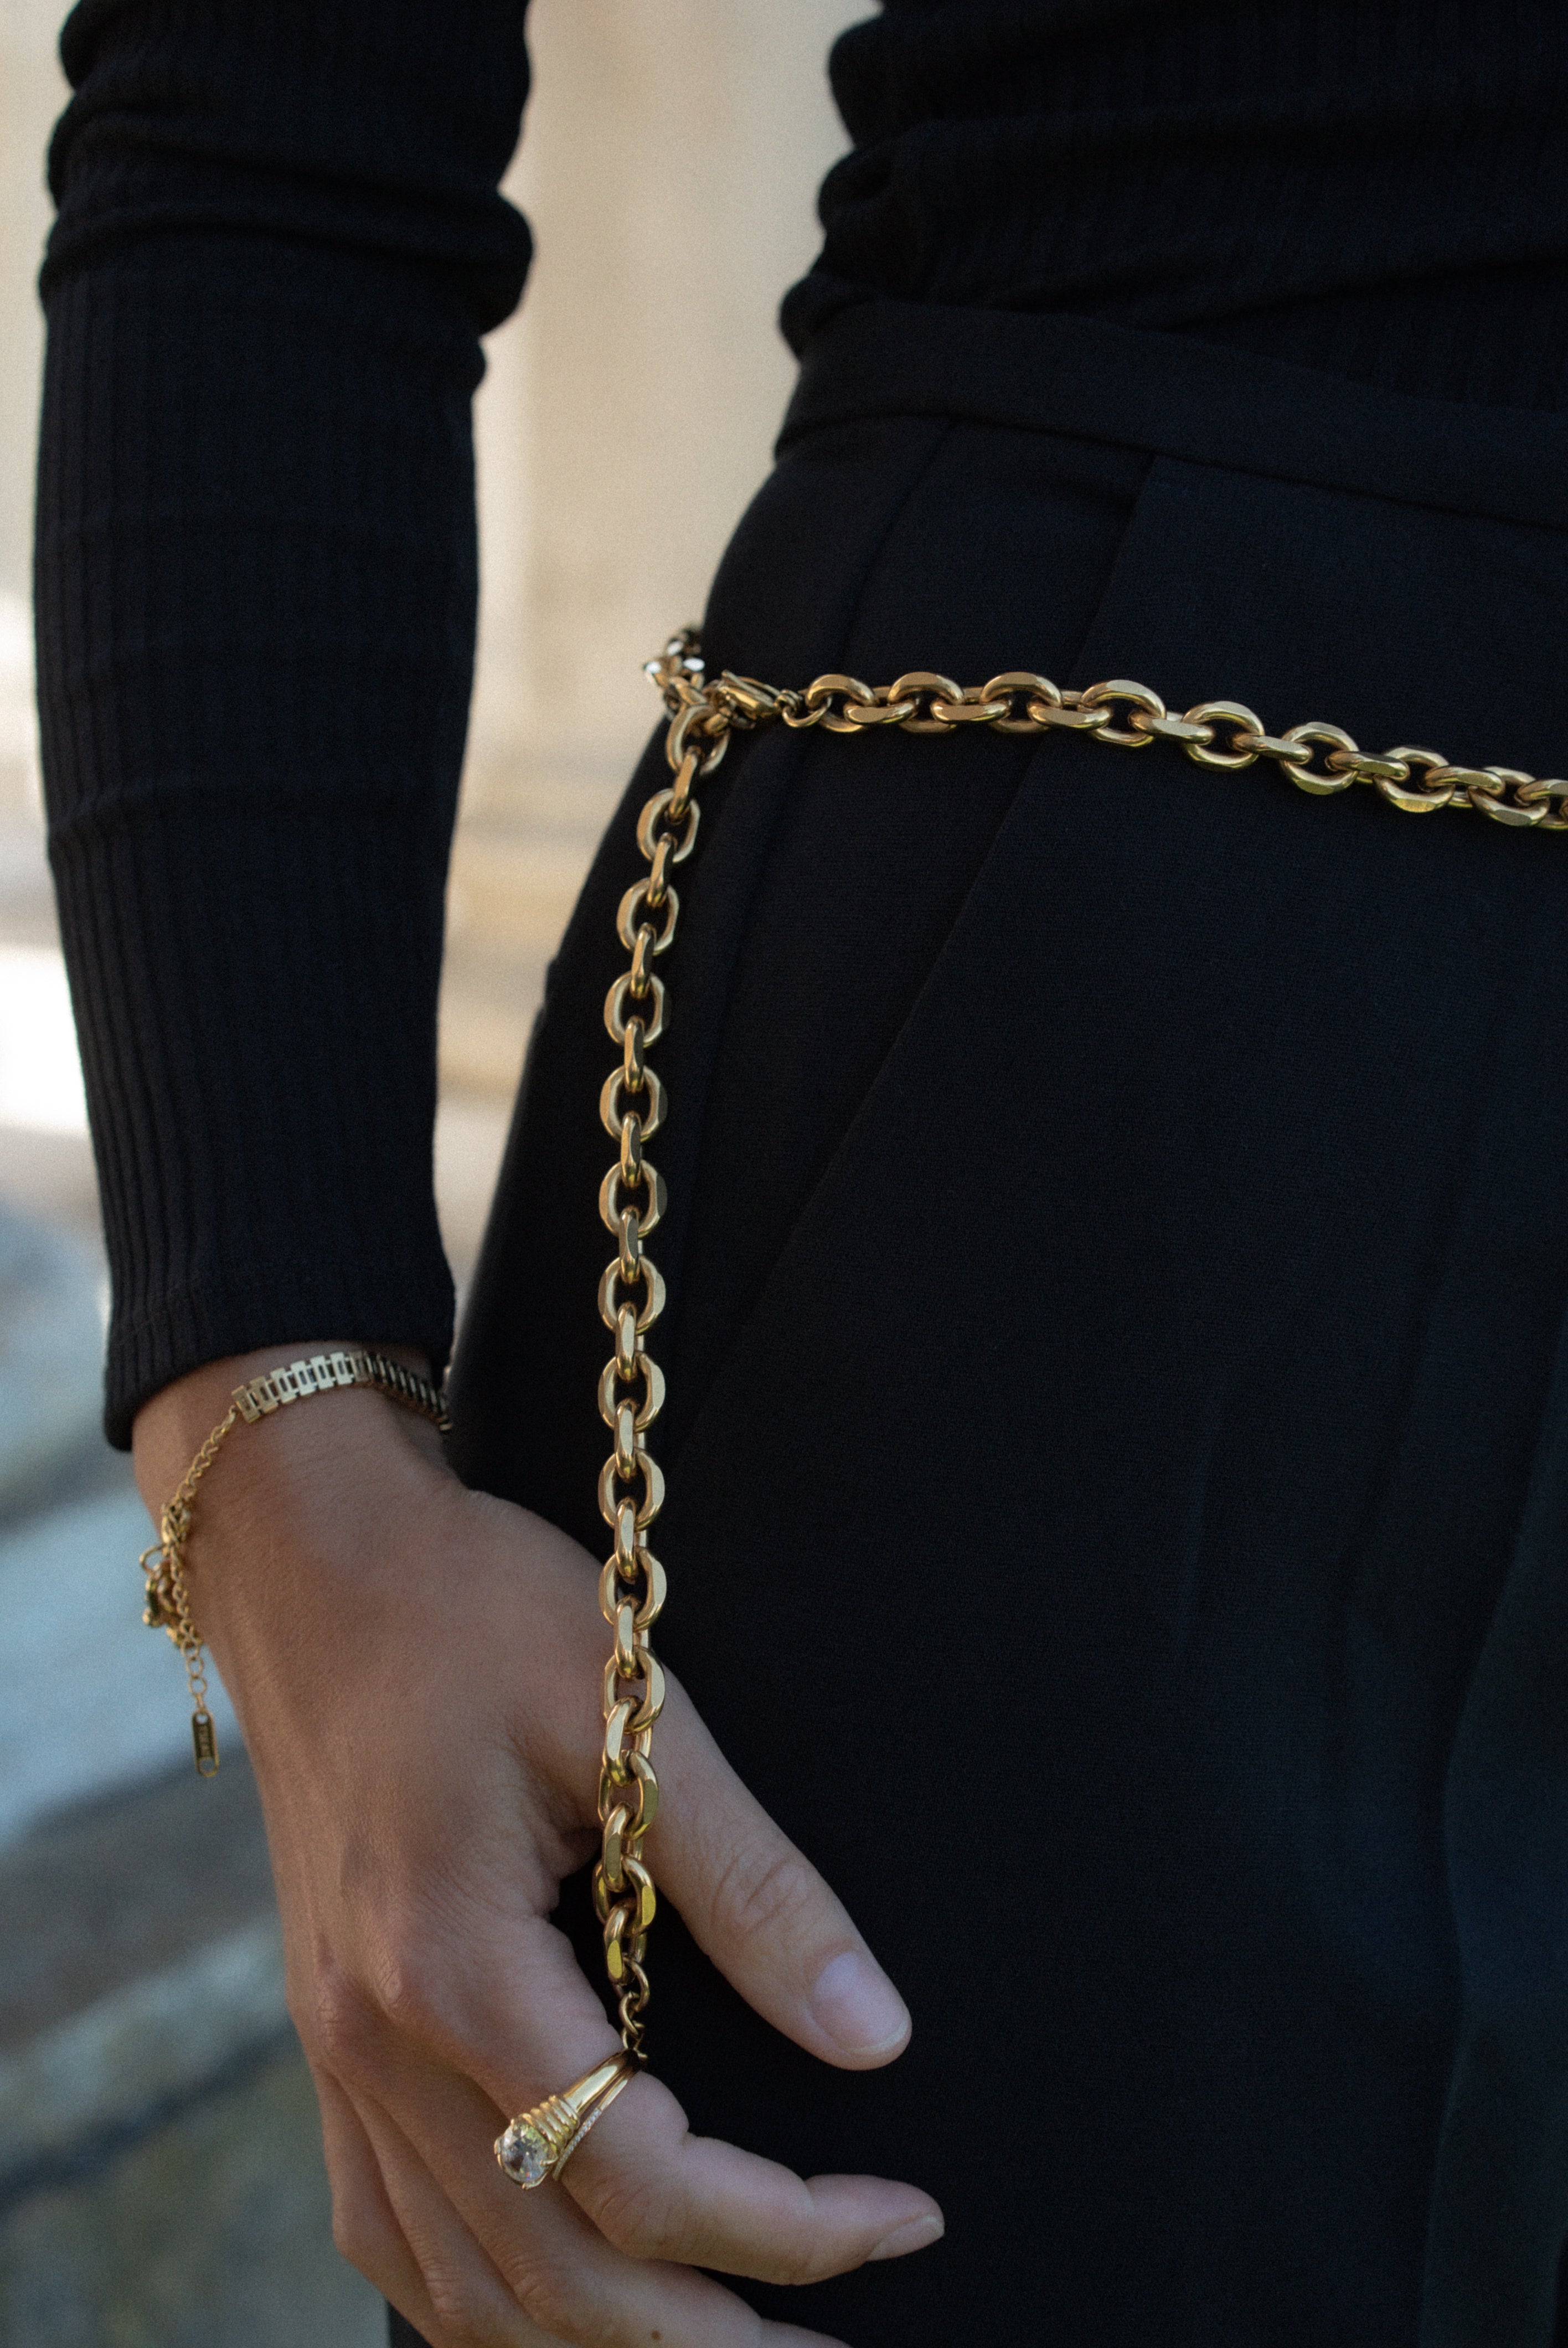 Merci beaucoup! We love our newest body chain accessory. Our chunky MERCI BELT CHAIN can be looped through belt loops on jeans, worn over a dress, skirts, trousers, the possibilities are endless. Make a statement in this versatile piece.  18K gold plated on stainless steel. Length:41" Extender: 6"  It can be hooked anywhere in the links you can adjust the length as you like.